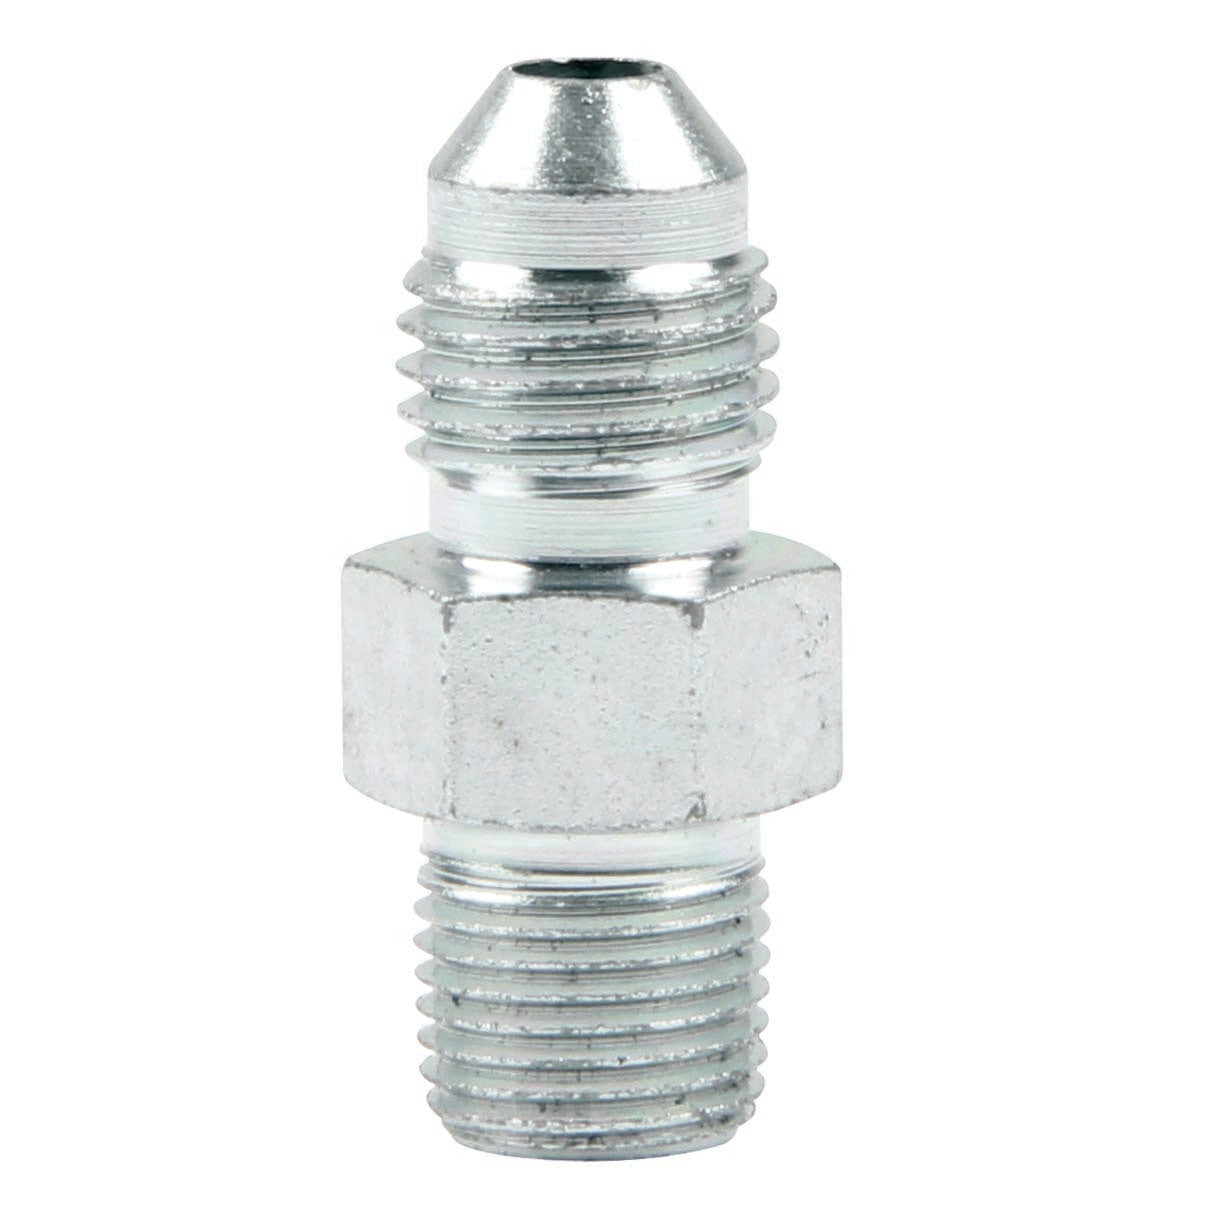 Adapter Fittings -4 to 1/8 NPT 2pk